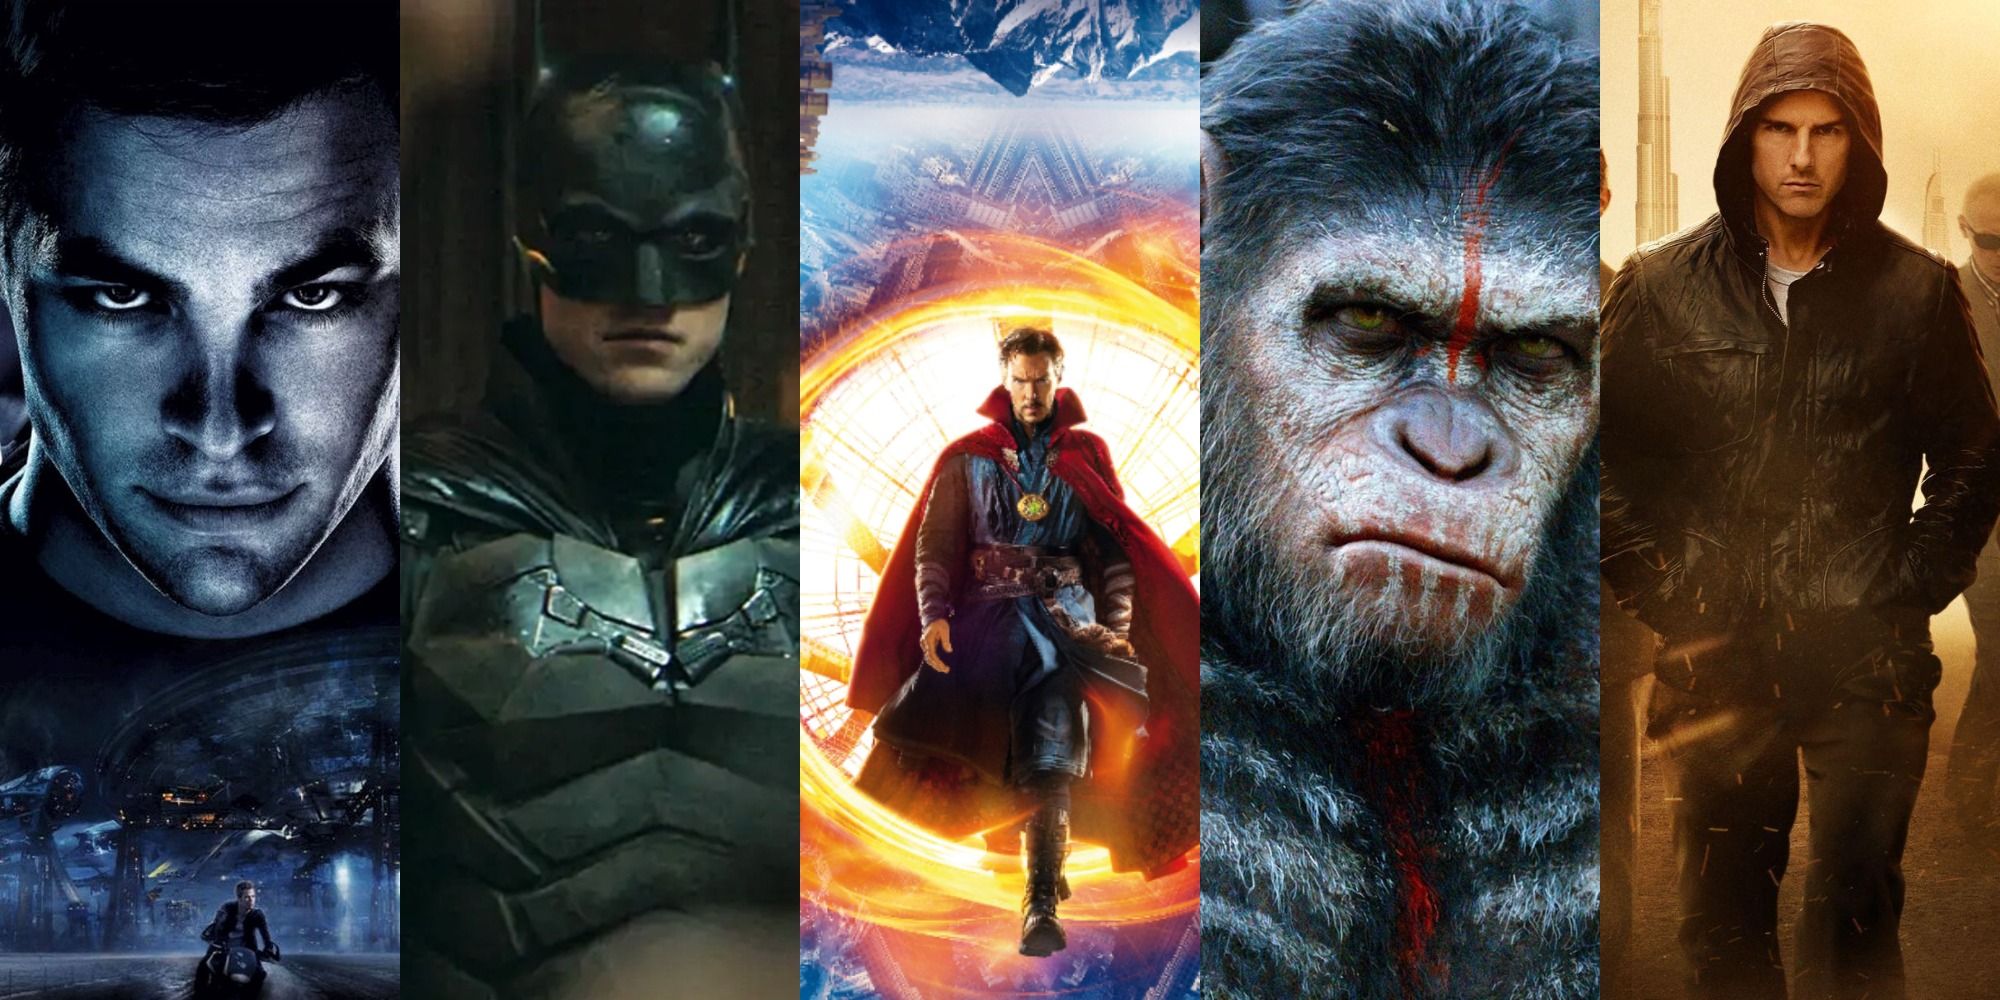 combined images of Star Trek, Dr. Strange, The Batman, Planet of the Apes, Mission Impossible 3